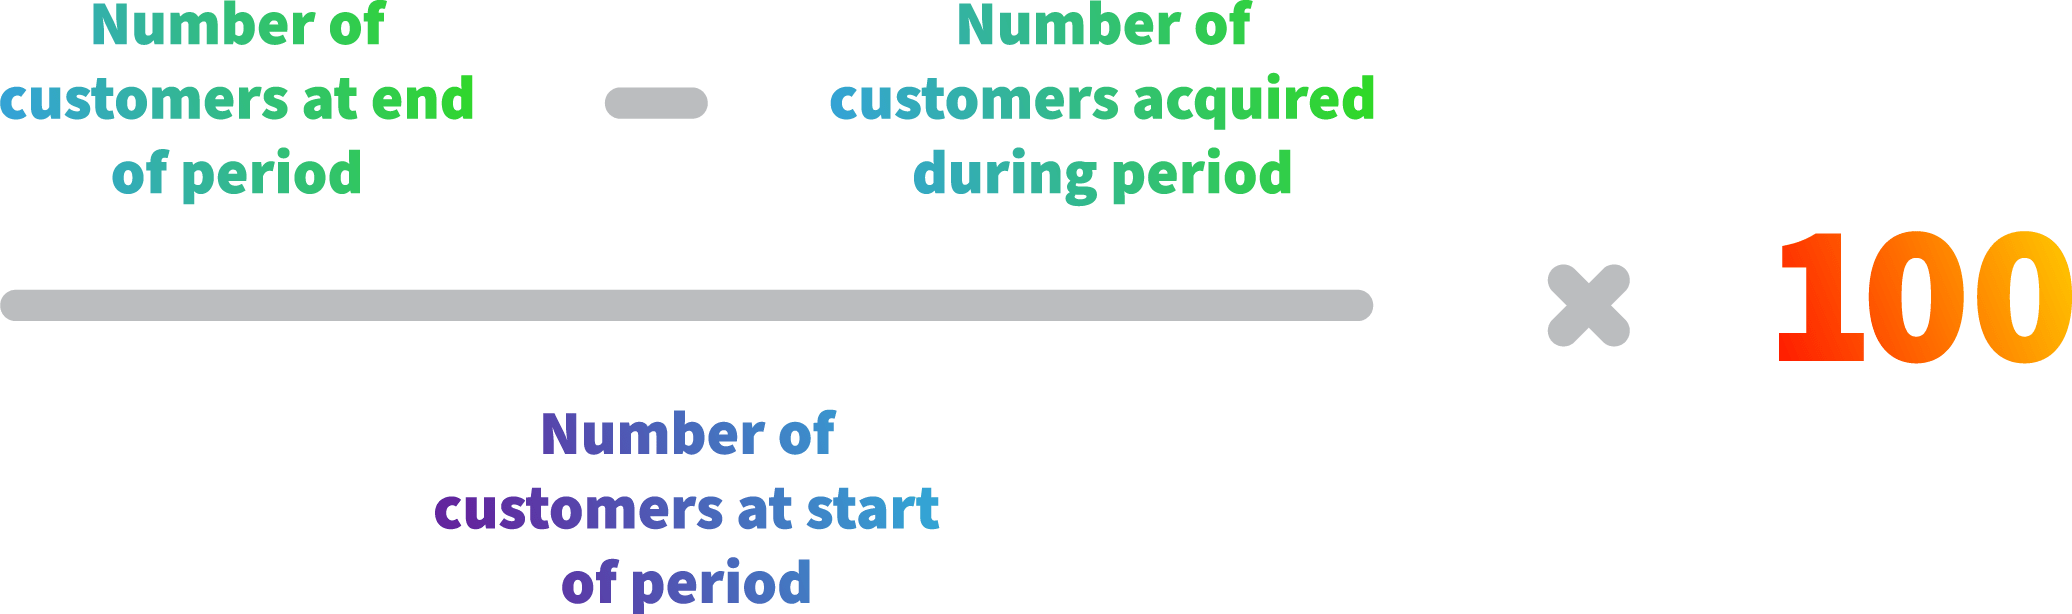 (Number of customers at end of period minus number of customers acquired during period) divided by number of customers at start of period, multiplied by 100